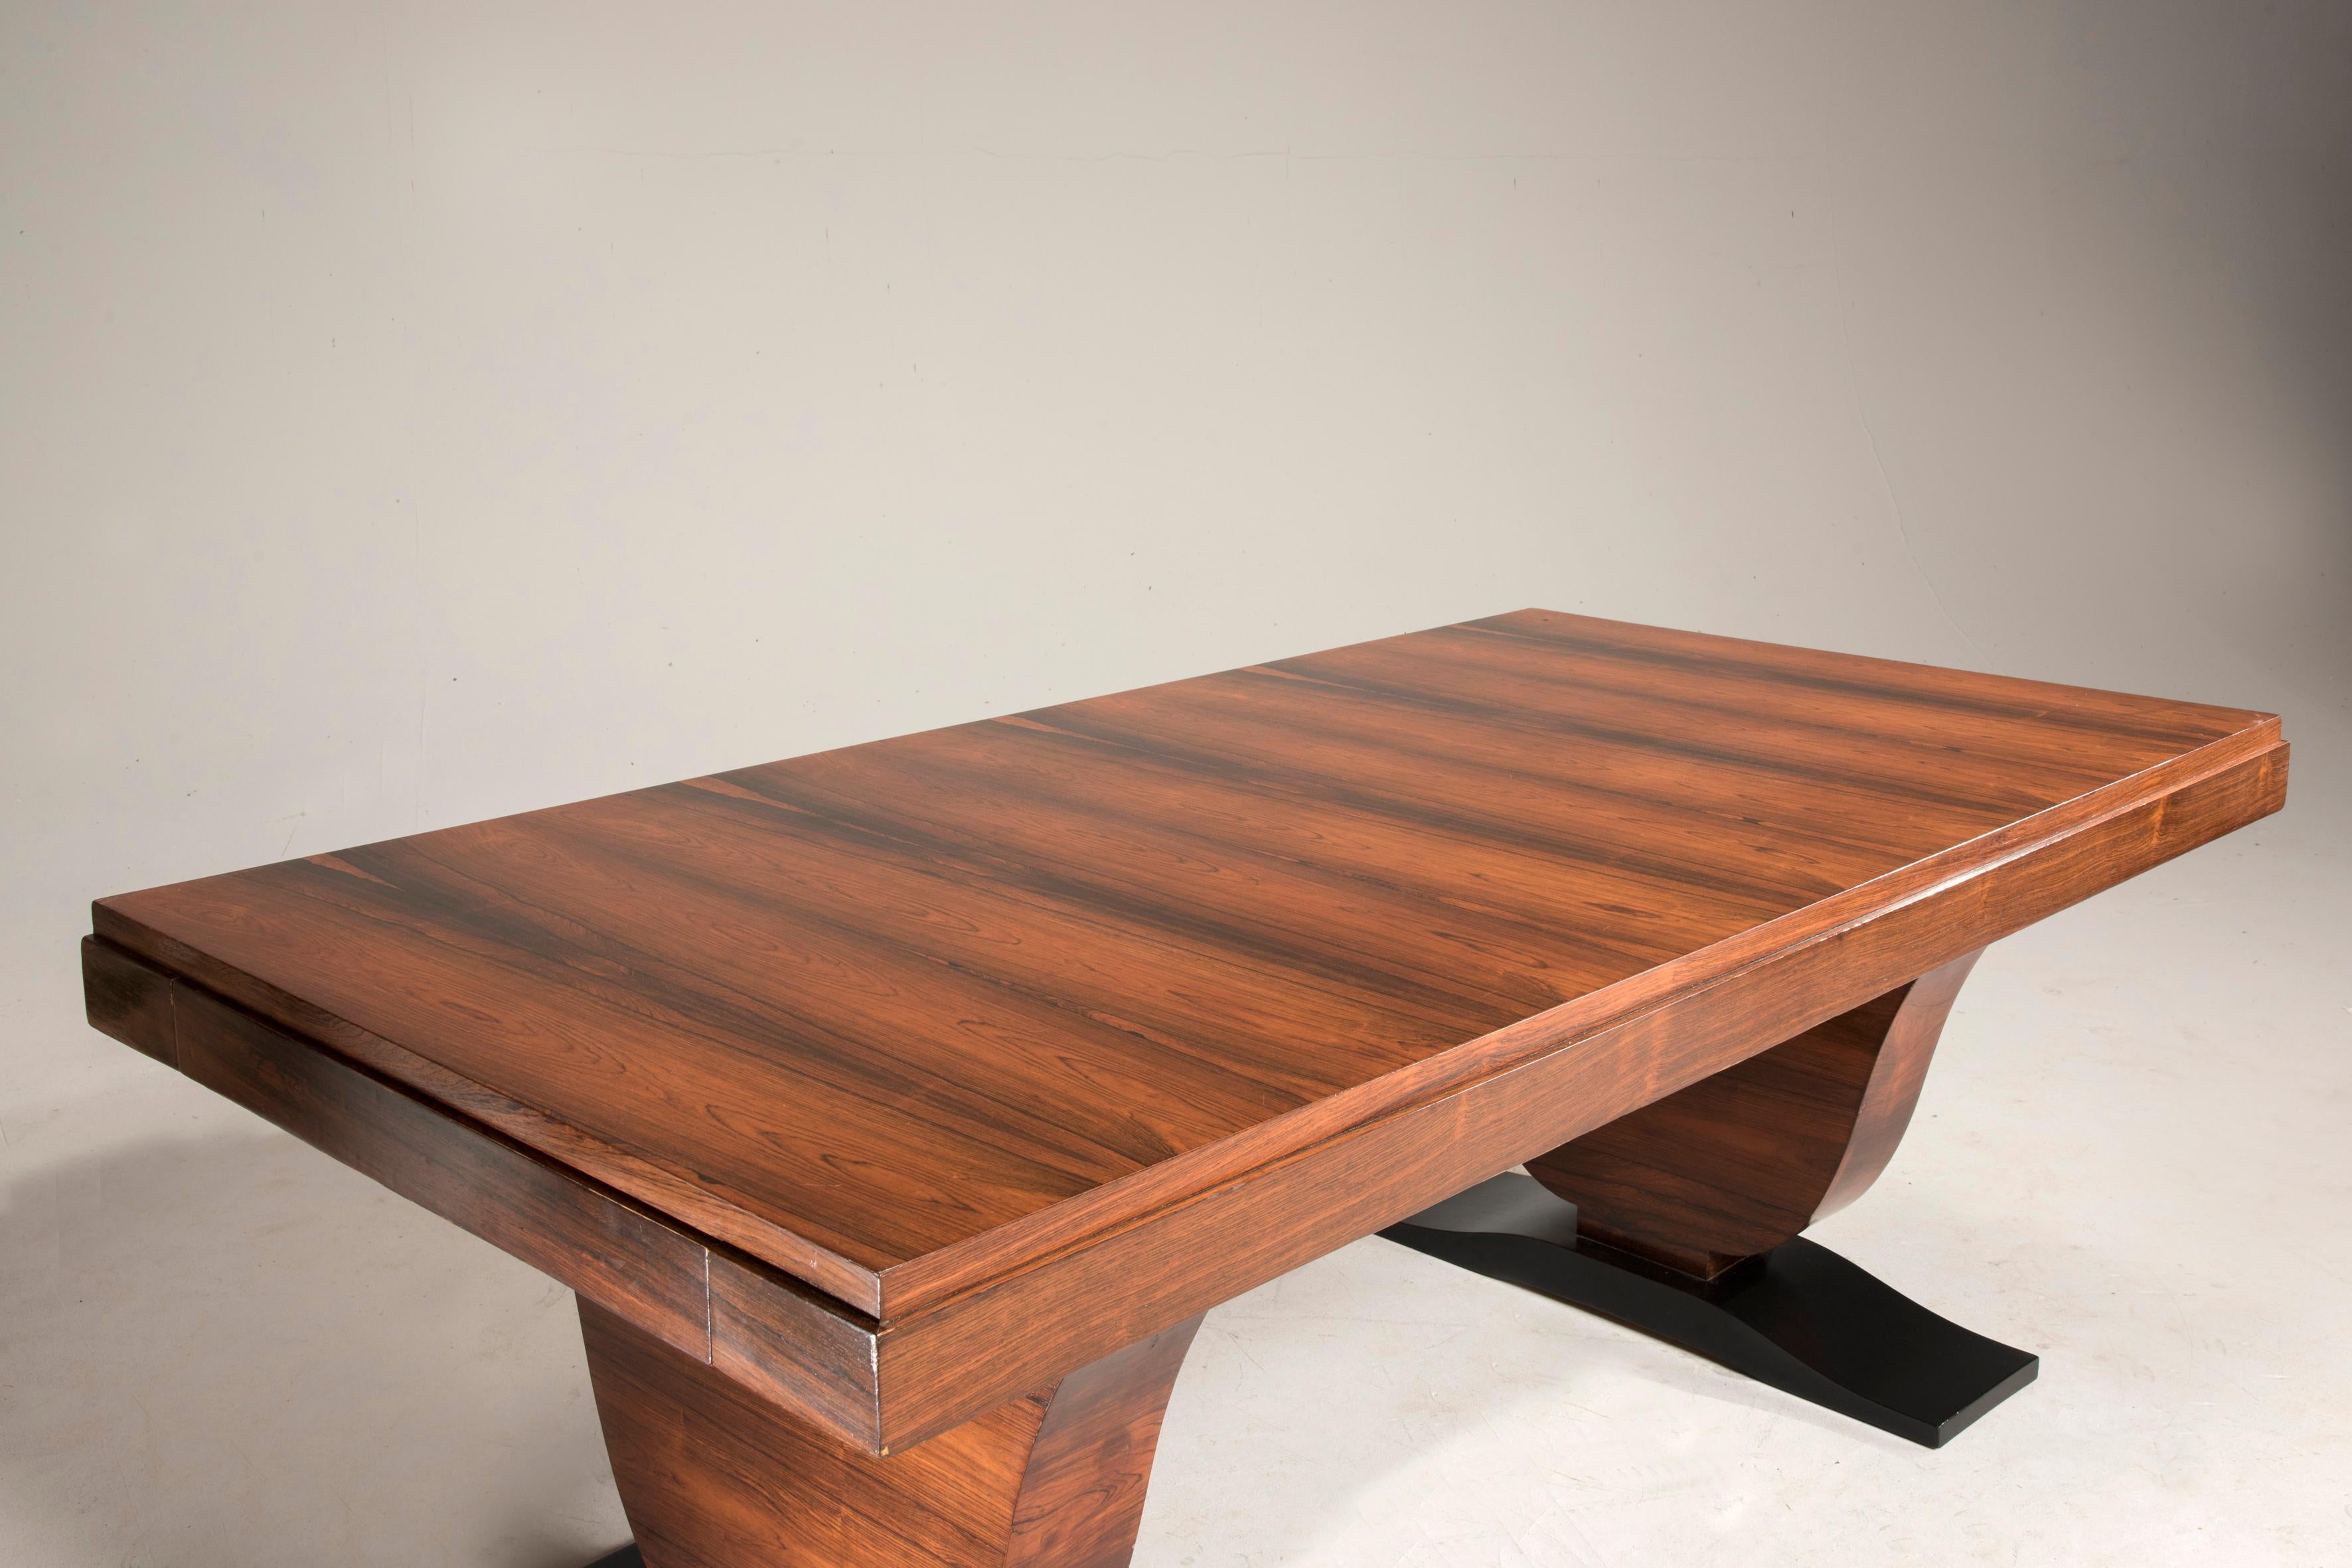 Art Deco rosewood extendable rectangular table.

From 1930s period from France, this table is fine for 8 people when closed, while it welcomes up to 12 people when extended. It features two extensions of 52 cm/ 20.5